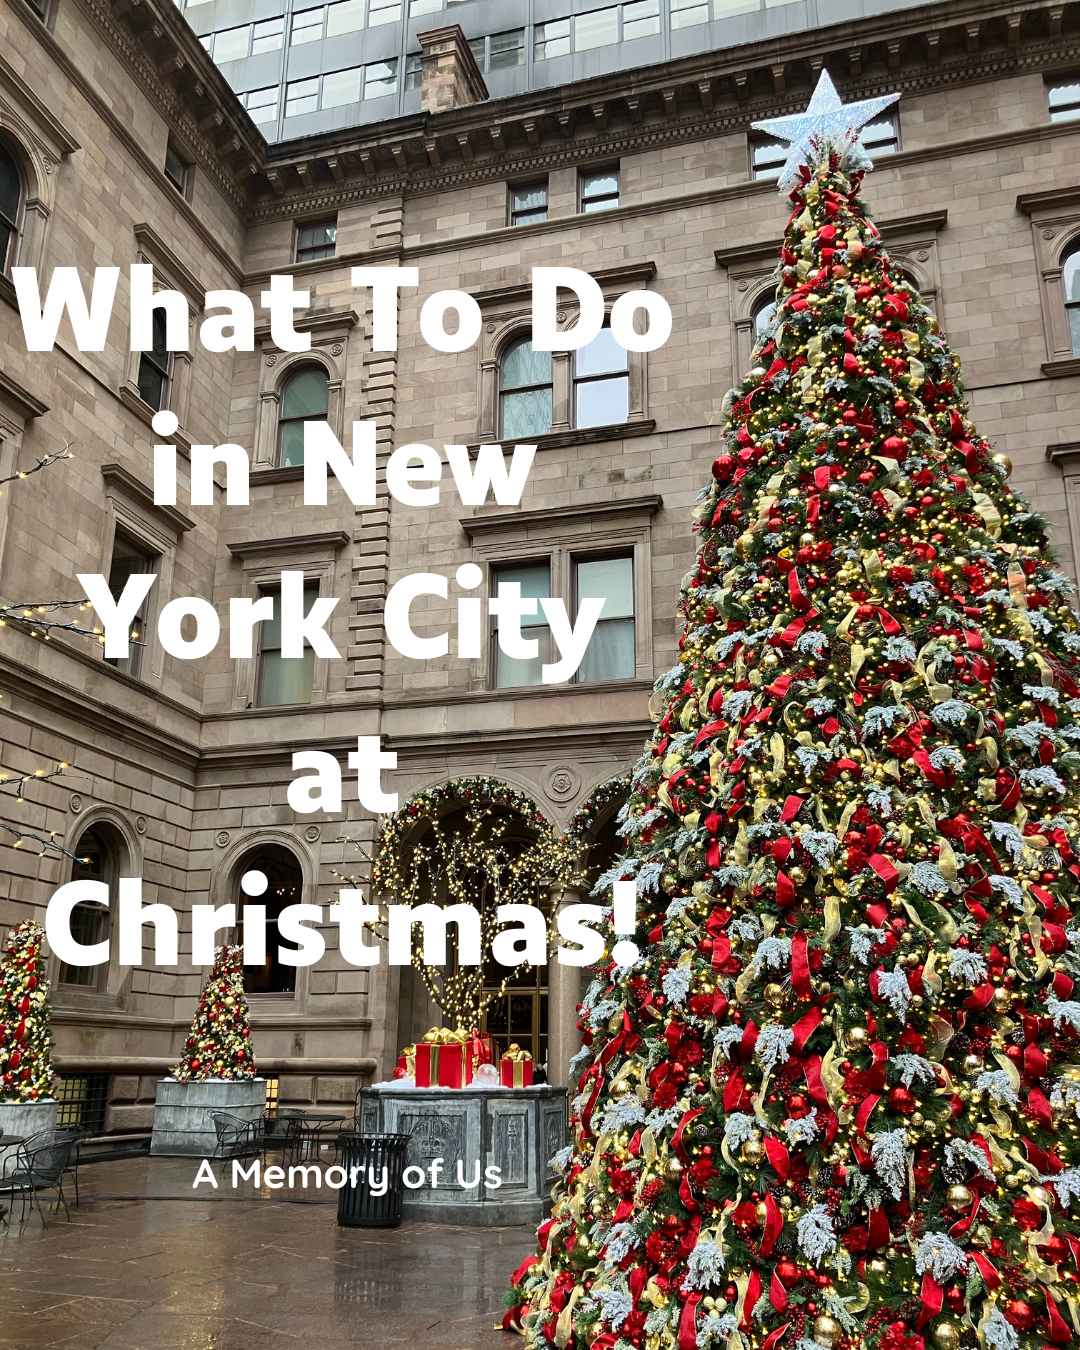 Itinerary for a Three Day Trip to NYC at Christmas, Christmas in NYC Itinerary, What to Do on a Trip to New York at Christmas, Girls trip to new york for Christmas, NYC at Christmas, Must Dos in NYC at Christmastime